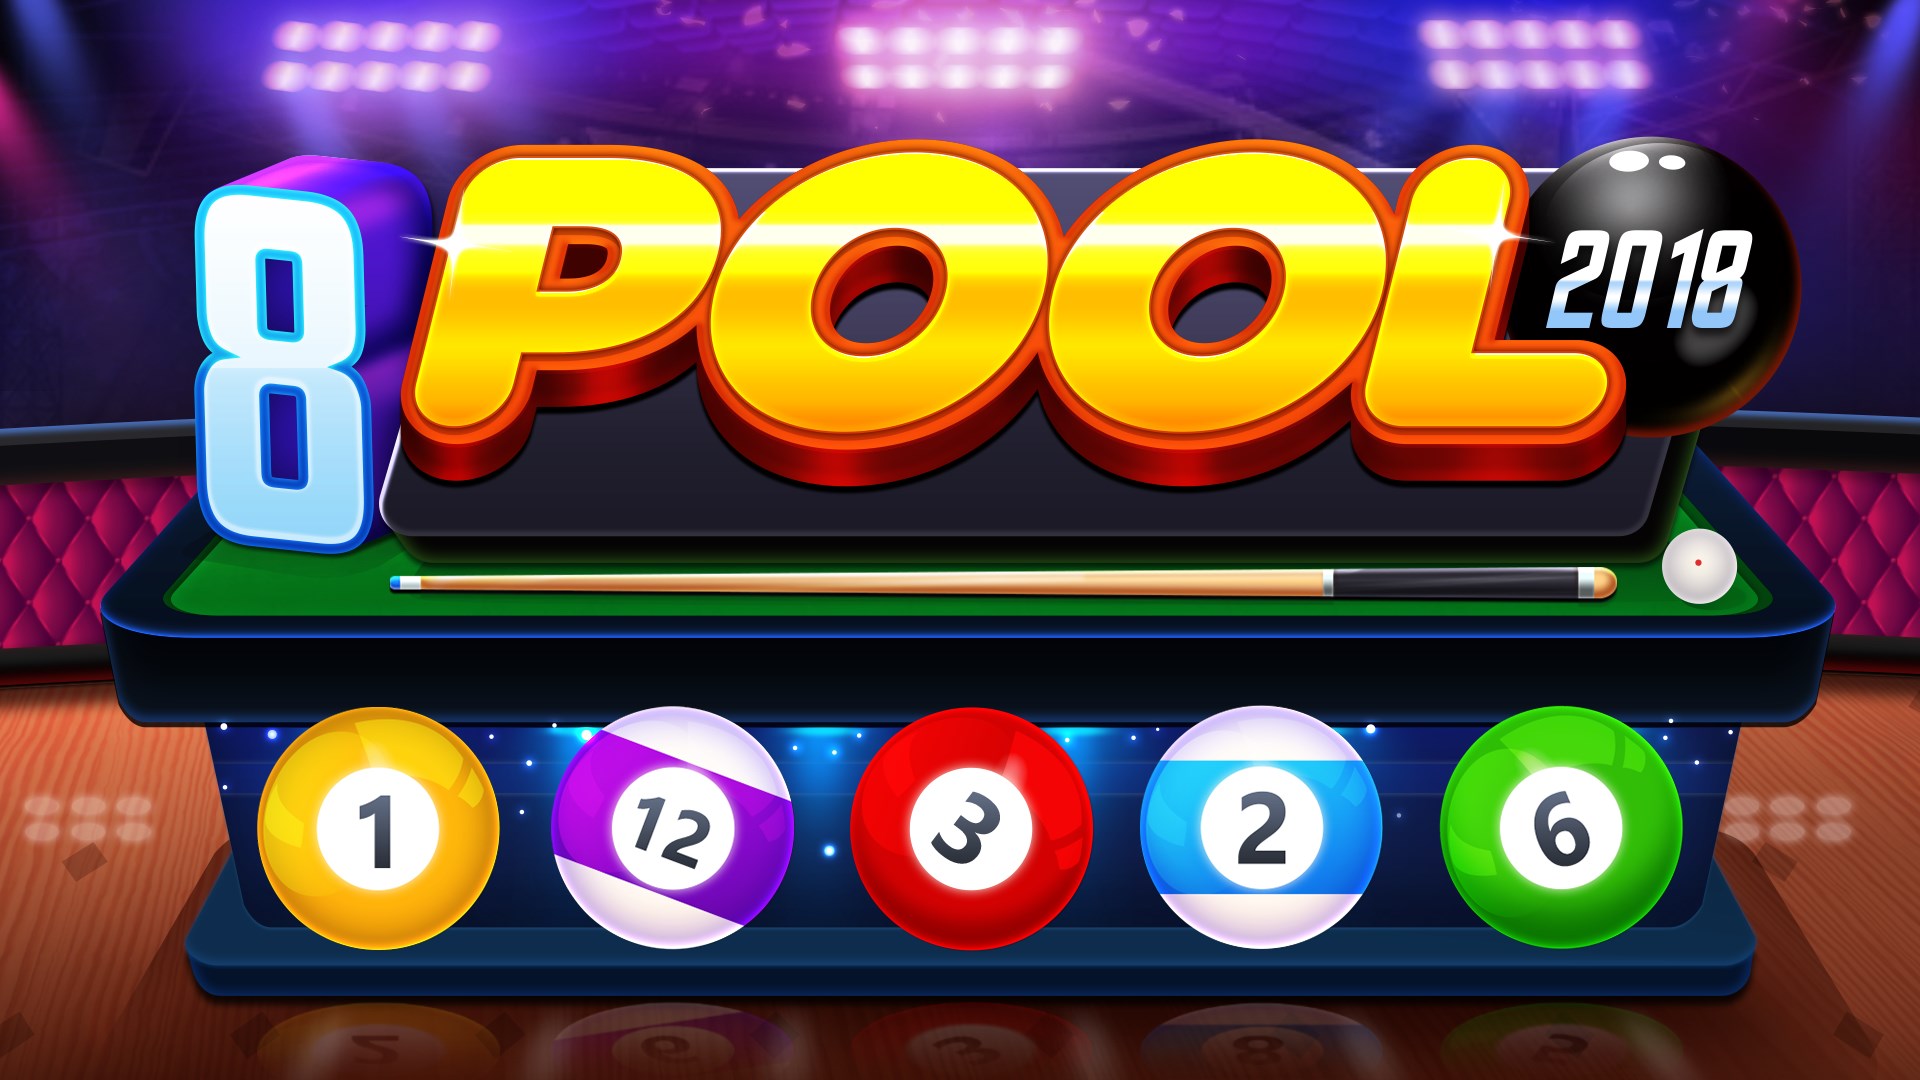 8 ball pool download for pc